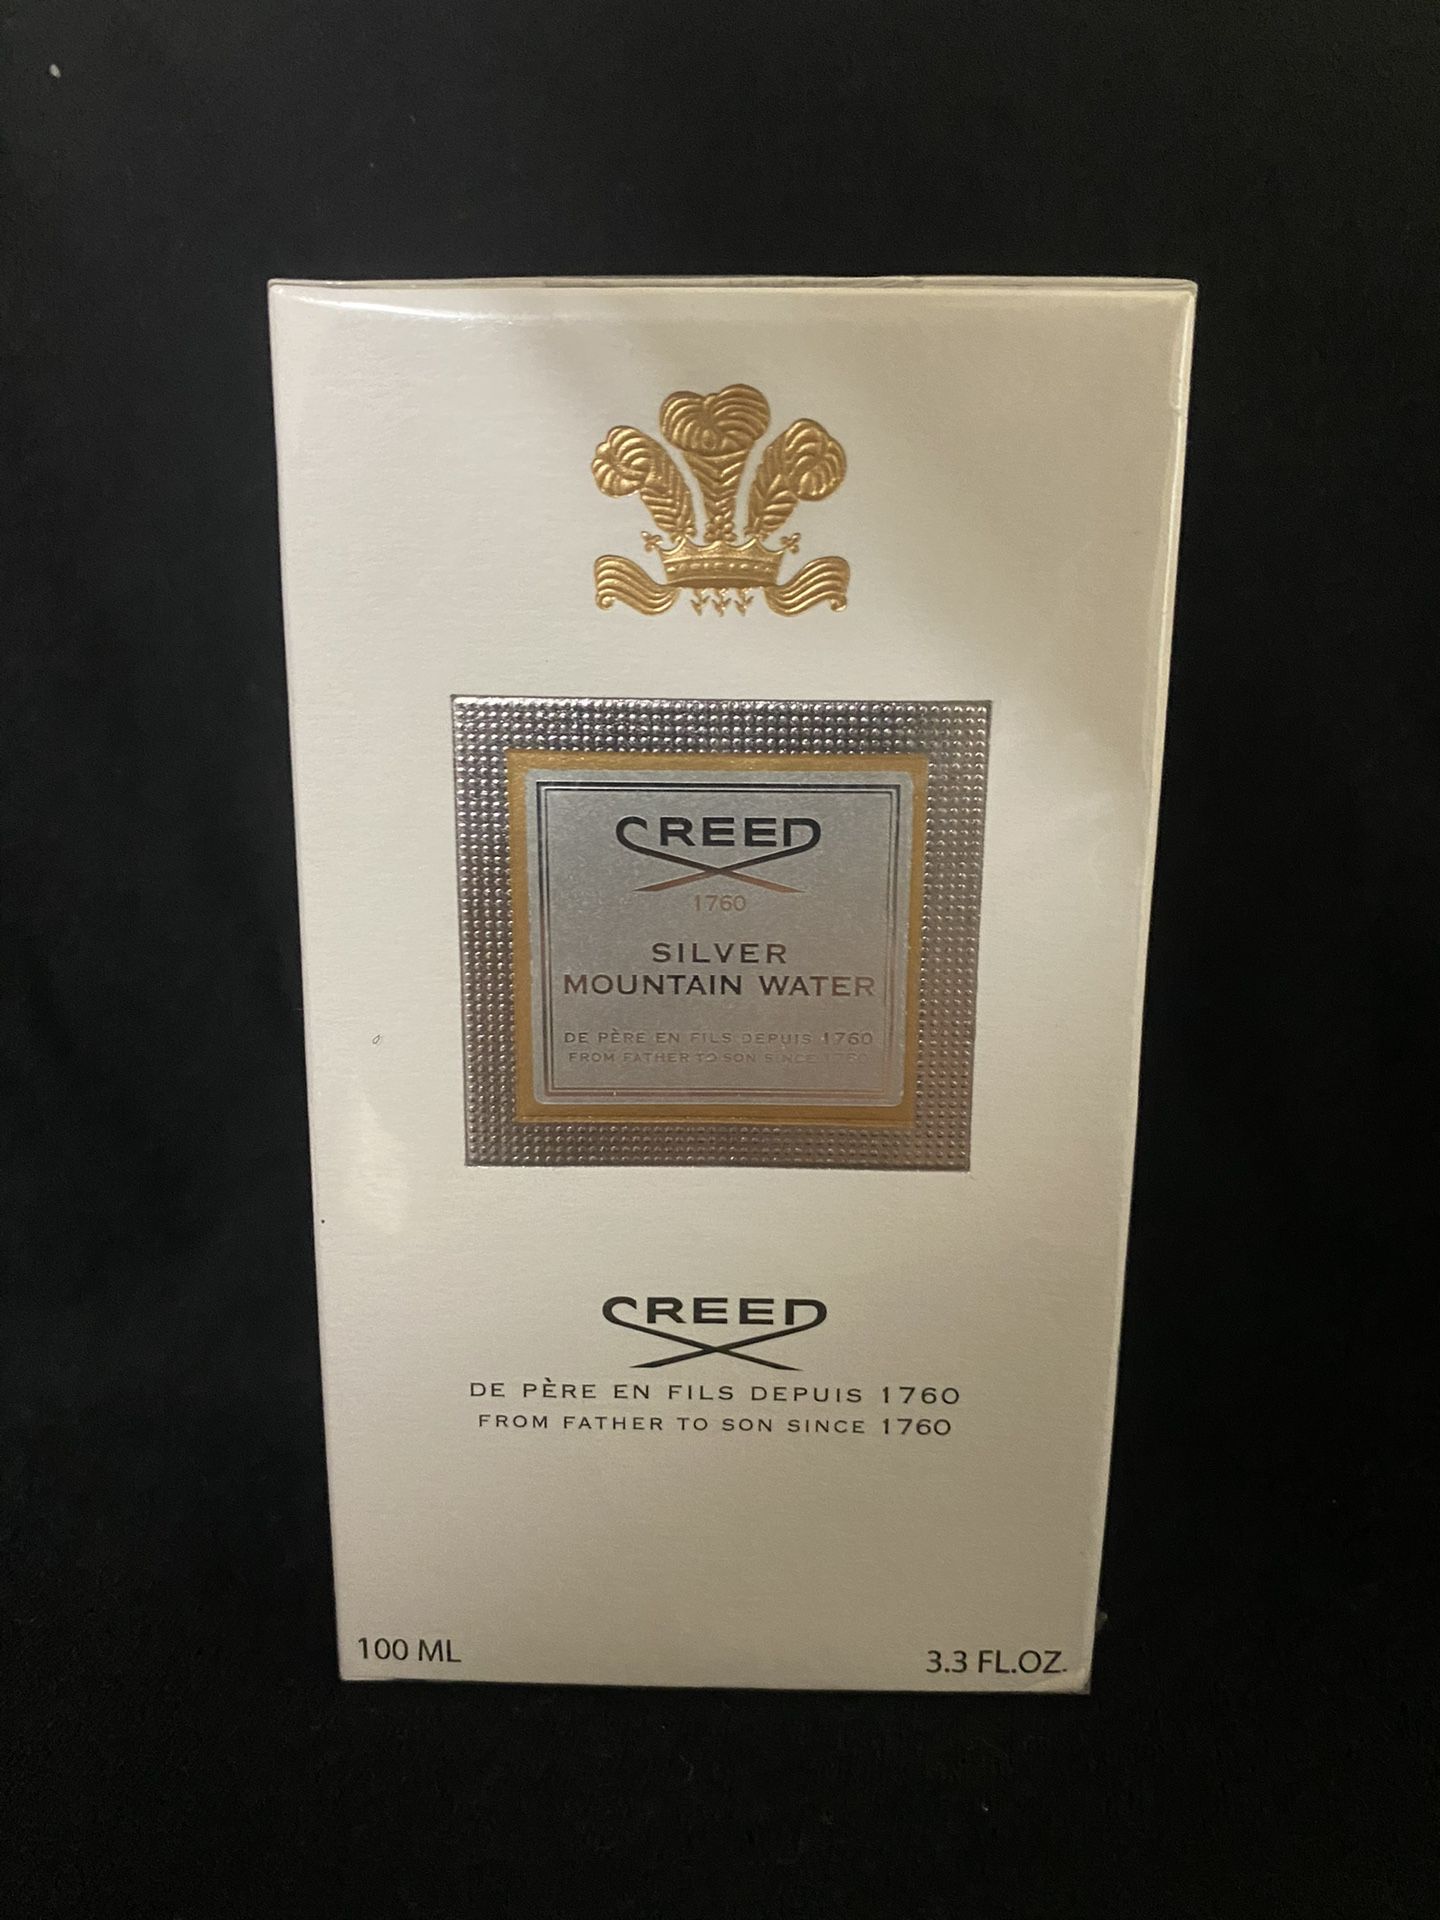 *PRICE NEGOTIABLE* CREED SILVER MOUNTAIN WATER